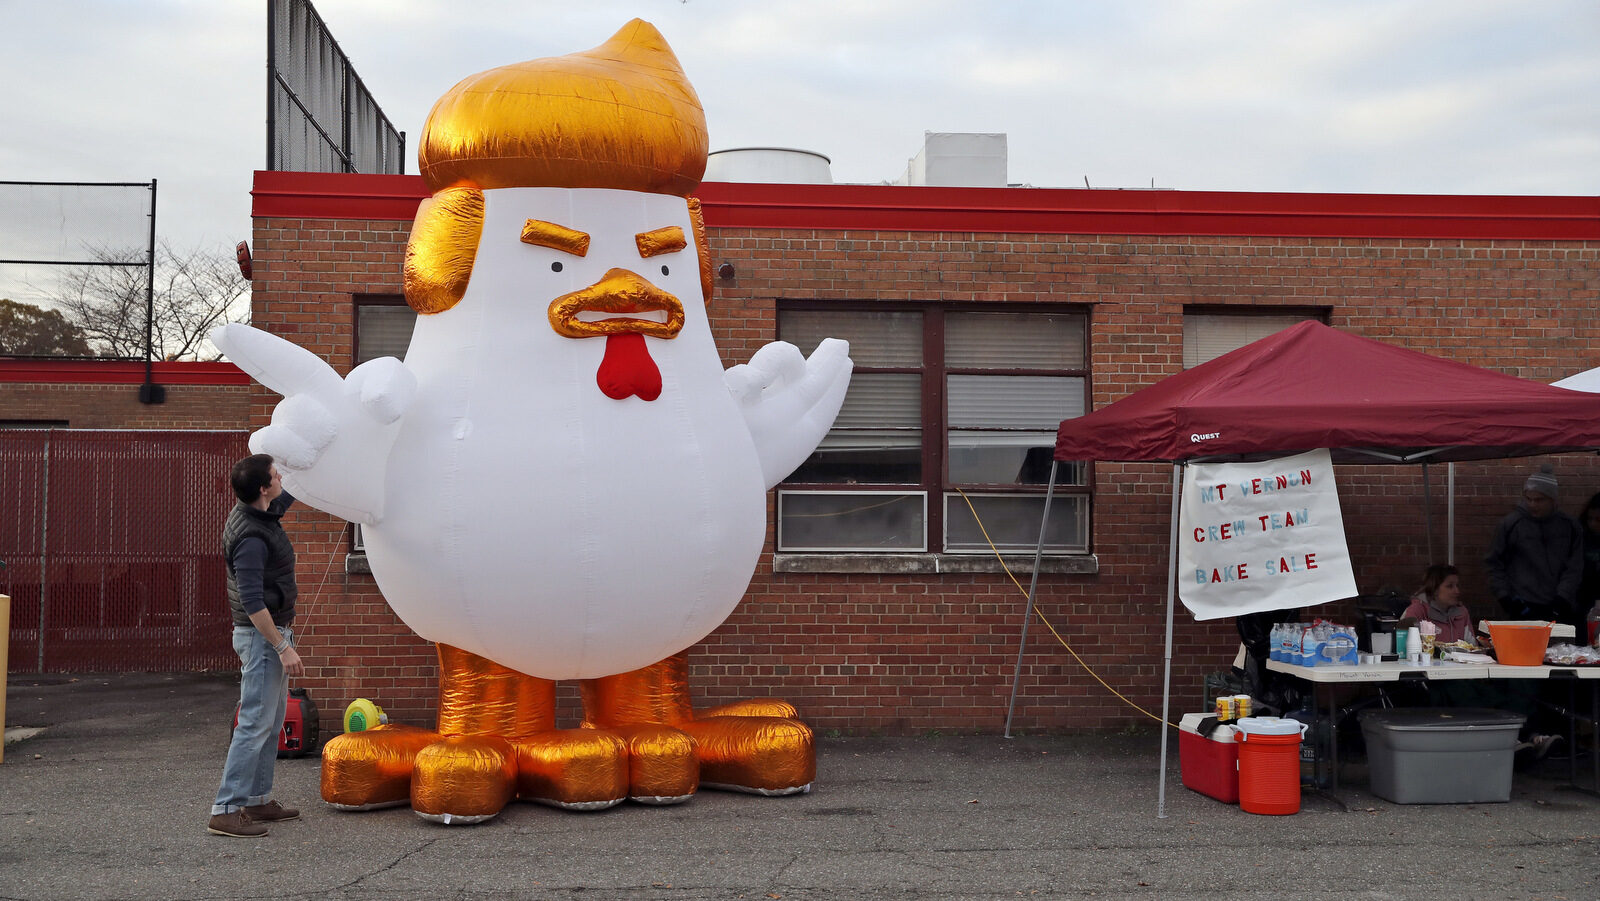 Ben Bostwick, a volunteer with the Northam campaign, adjusts an inflatable Trump chicken at a polling place, Nov. 7, 2017, in Alexandria, Va. Republican candidate for Virginia governor Ed Gillespie faces Democrat Lt. Gov. Ralph Northam in Tuesday's election. (AP/Alex Brandon)